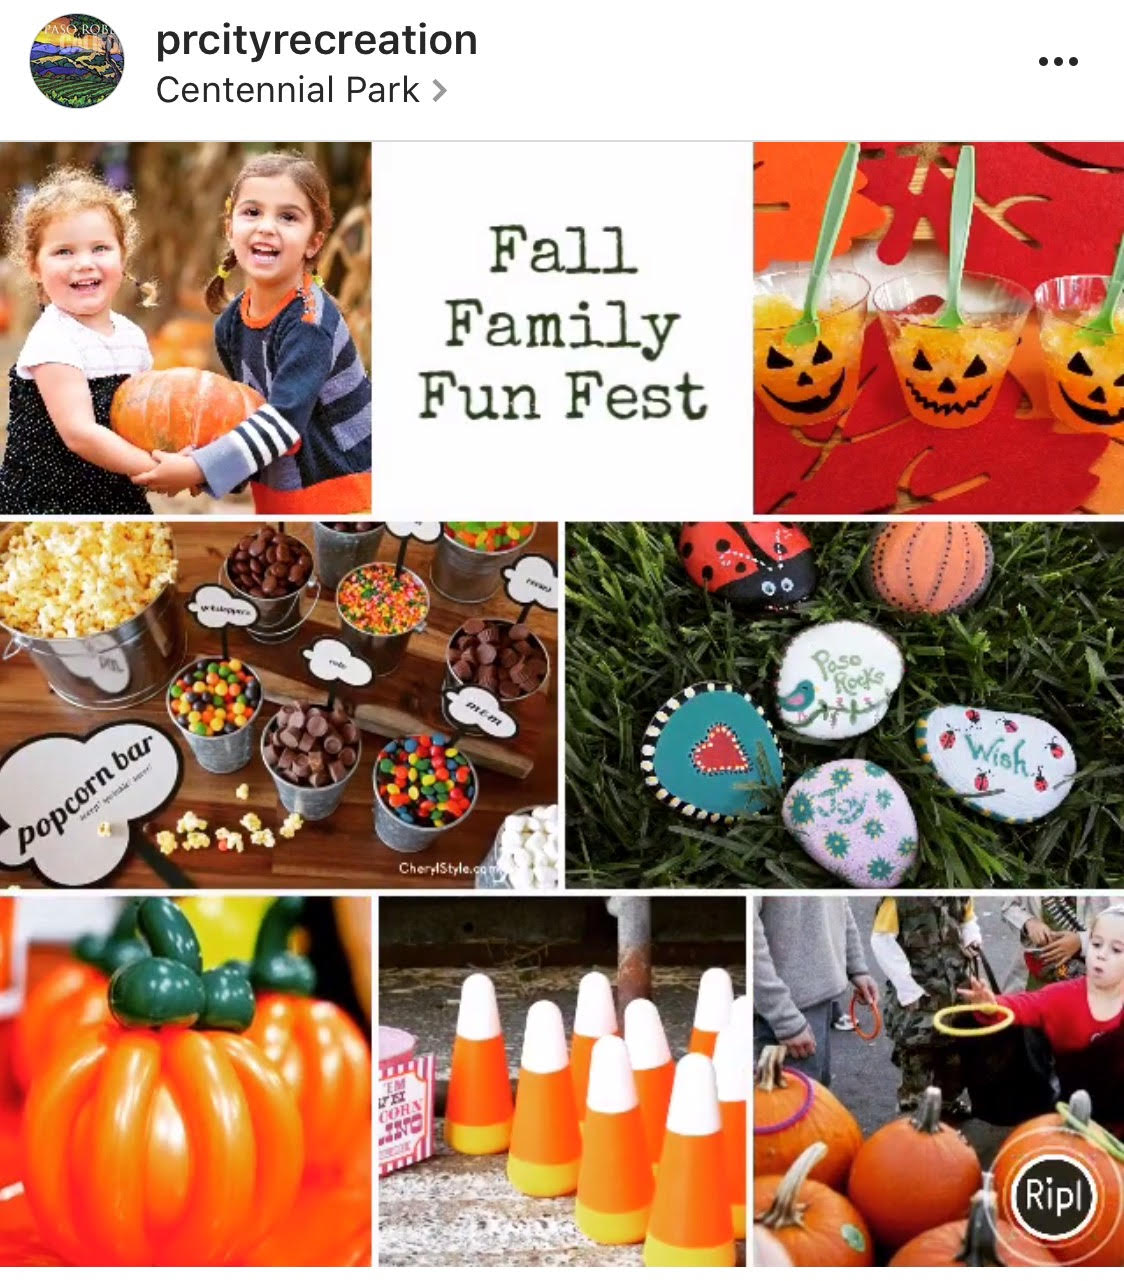 Fall Family Fun Fest Planned for Saturday, September 9 at Centennial Park Paso Robles Recreation Services Kicks-Off Fall Season With Family Friendly Event